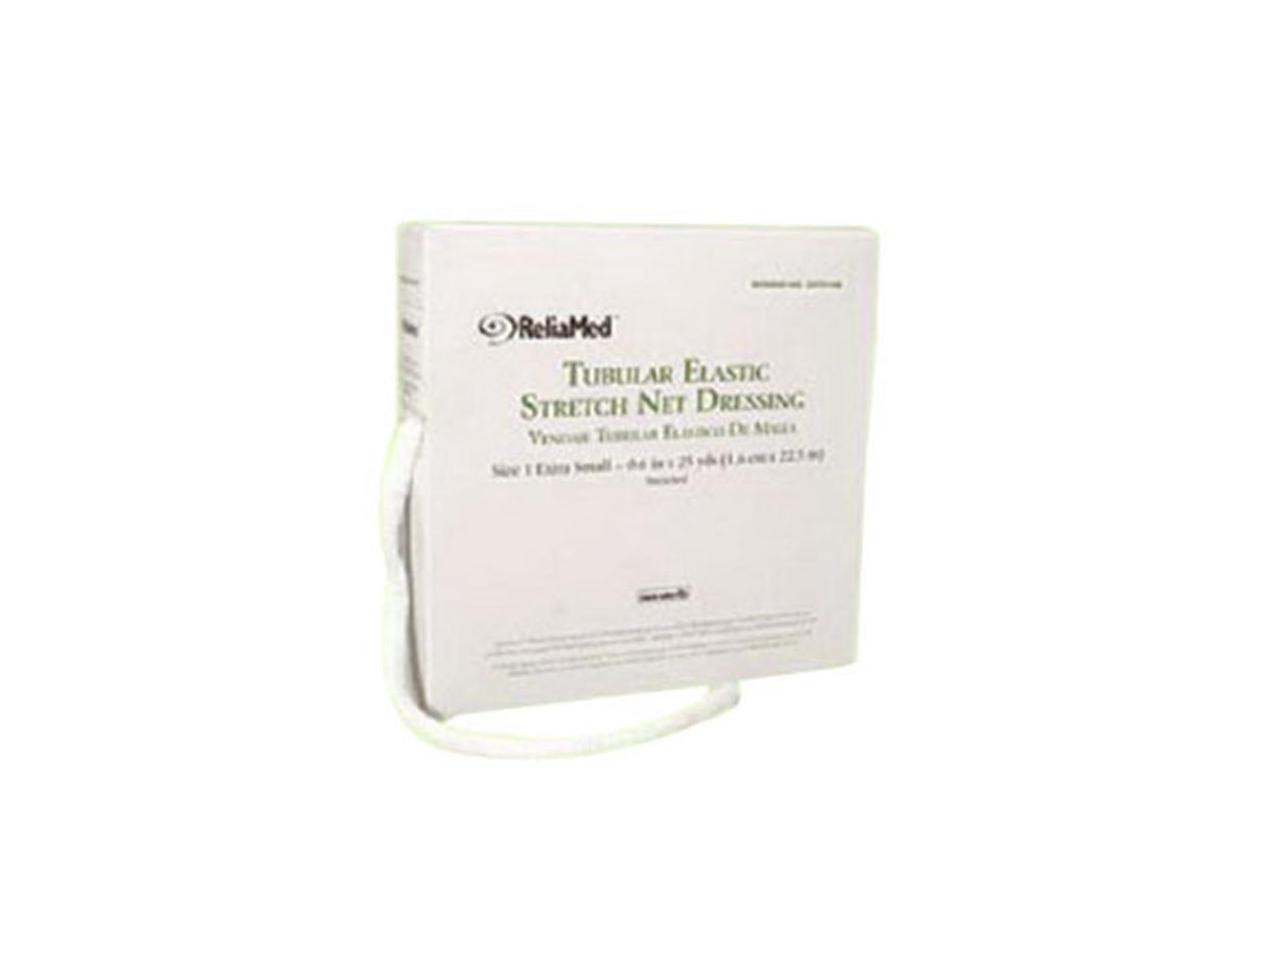 Reliamed Tubular Elastic Stretch Net Dressing, Large 30&quot; - 36&quot; X 25 Yds. (chest, Back, Perineum And Axilla)